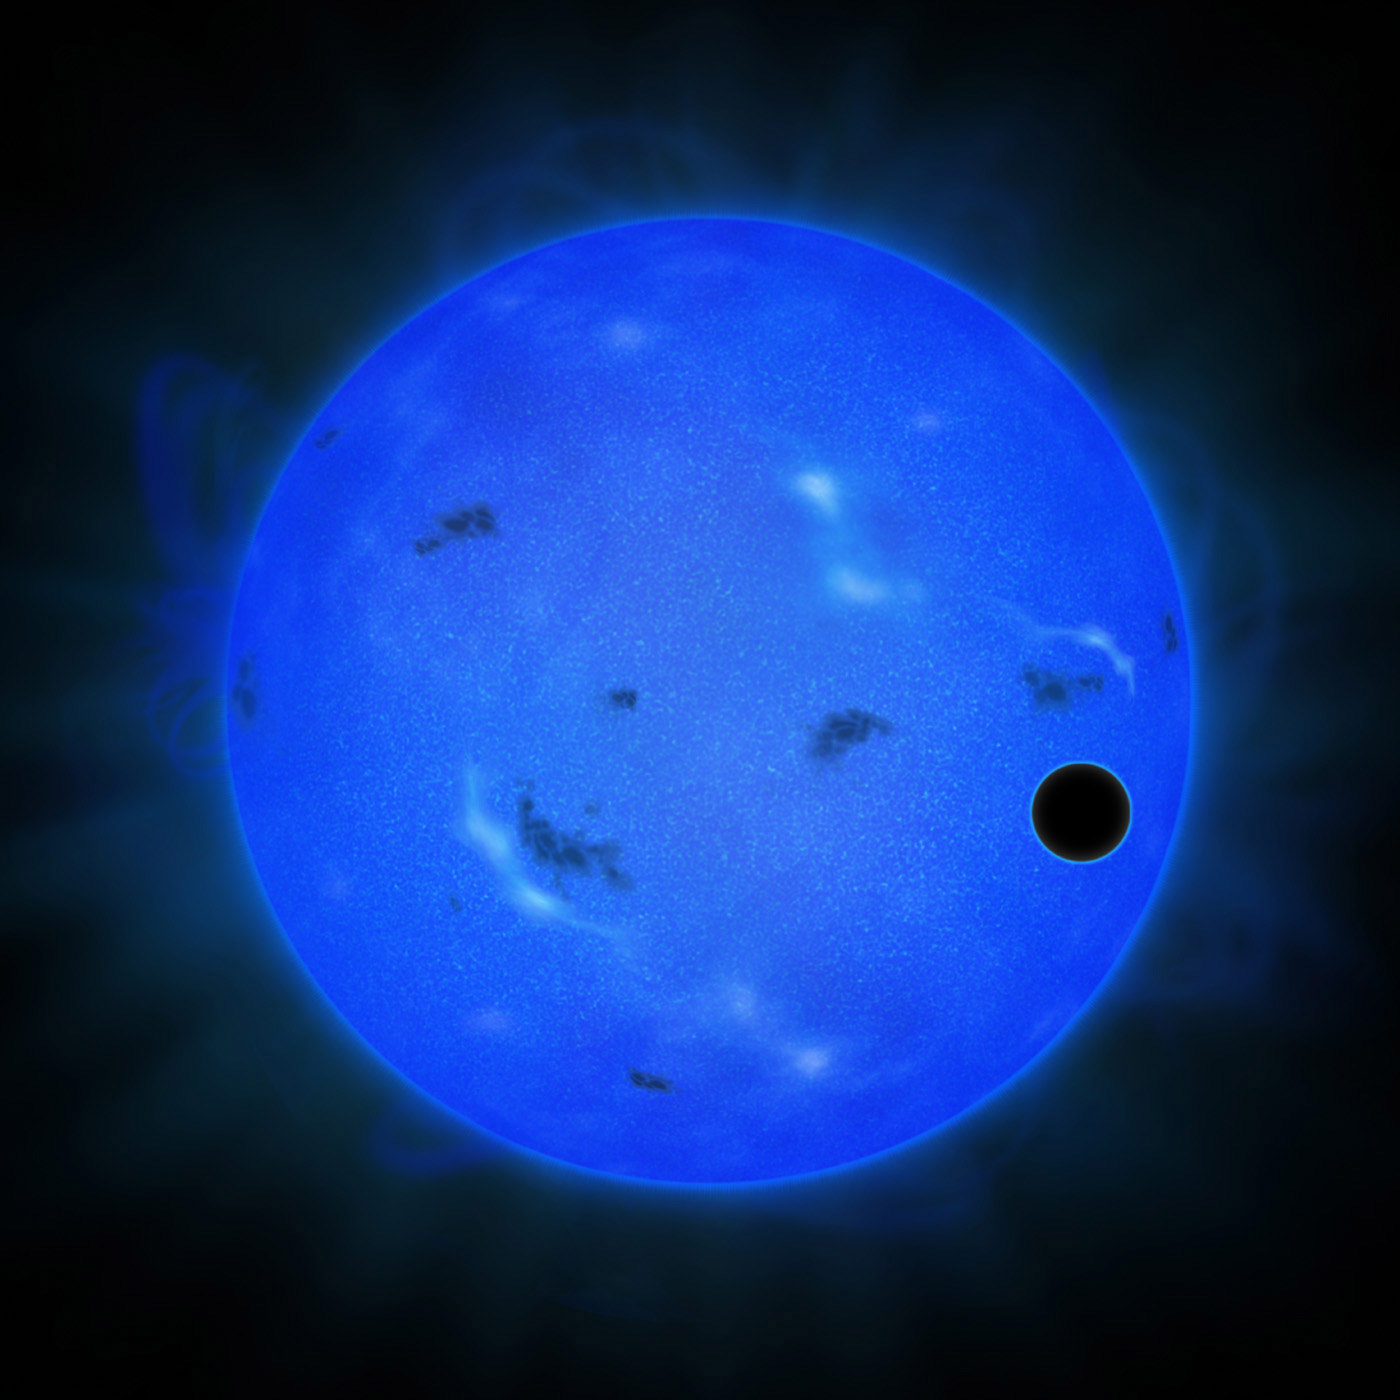 Observations Indicate Super-Earth GJ 1214 b Has a Water-Rich Atmosphere